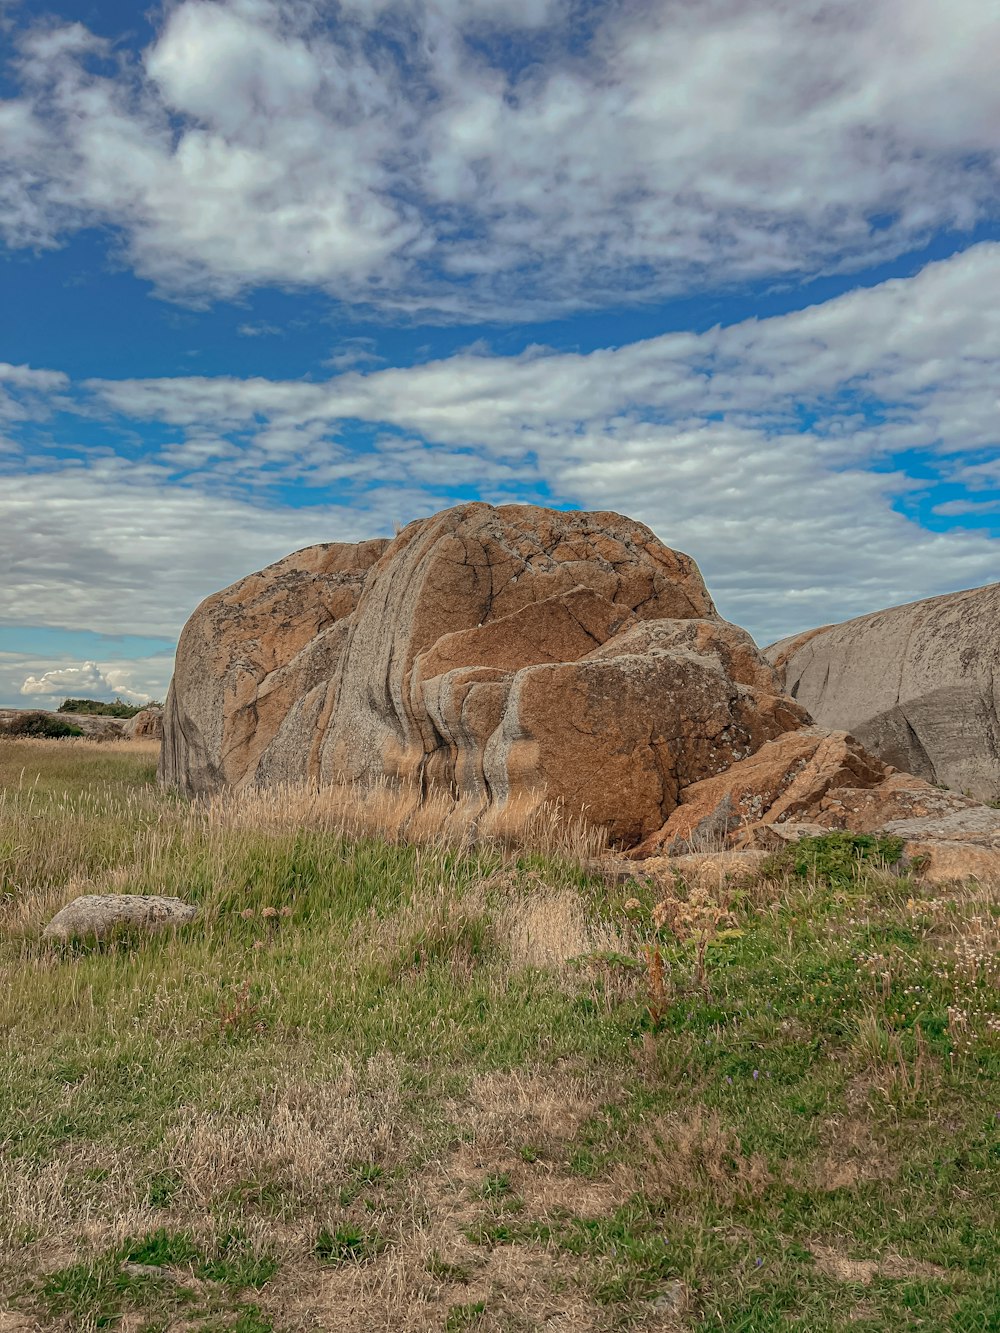 a large rock in the middle of a grassy field